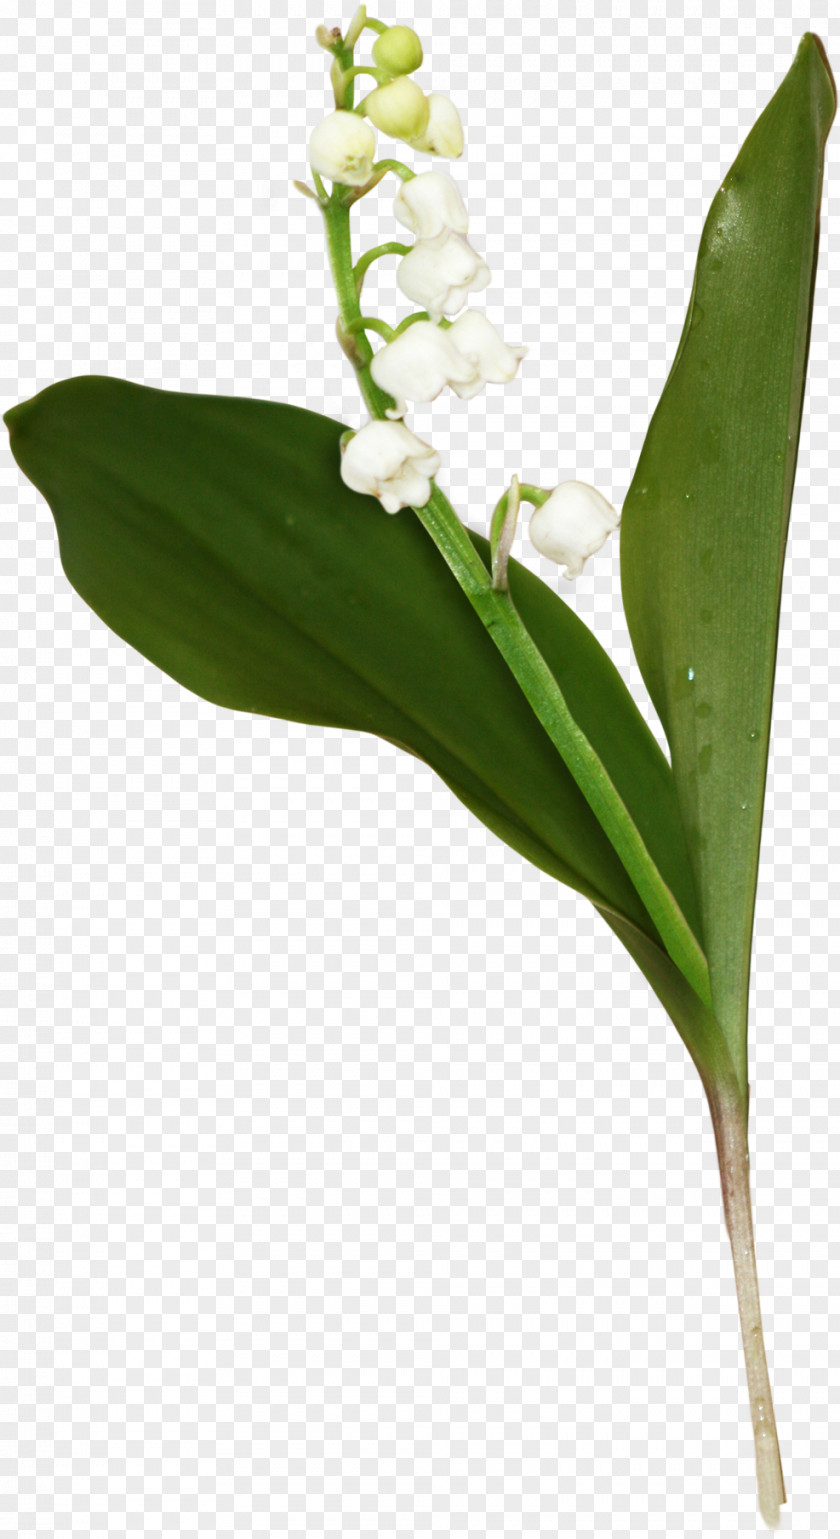 Lily Of The Valley Flower Floral Design Clip Art PNG